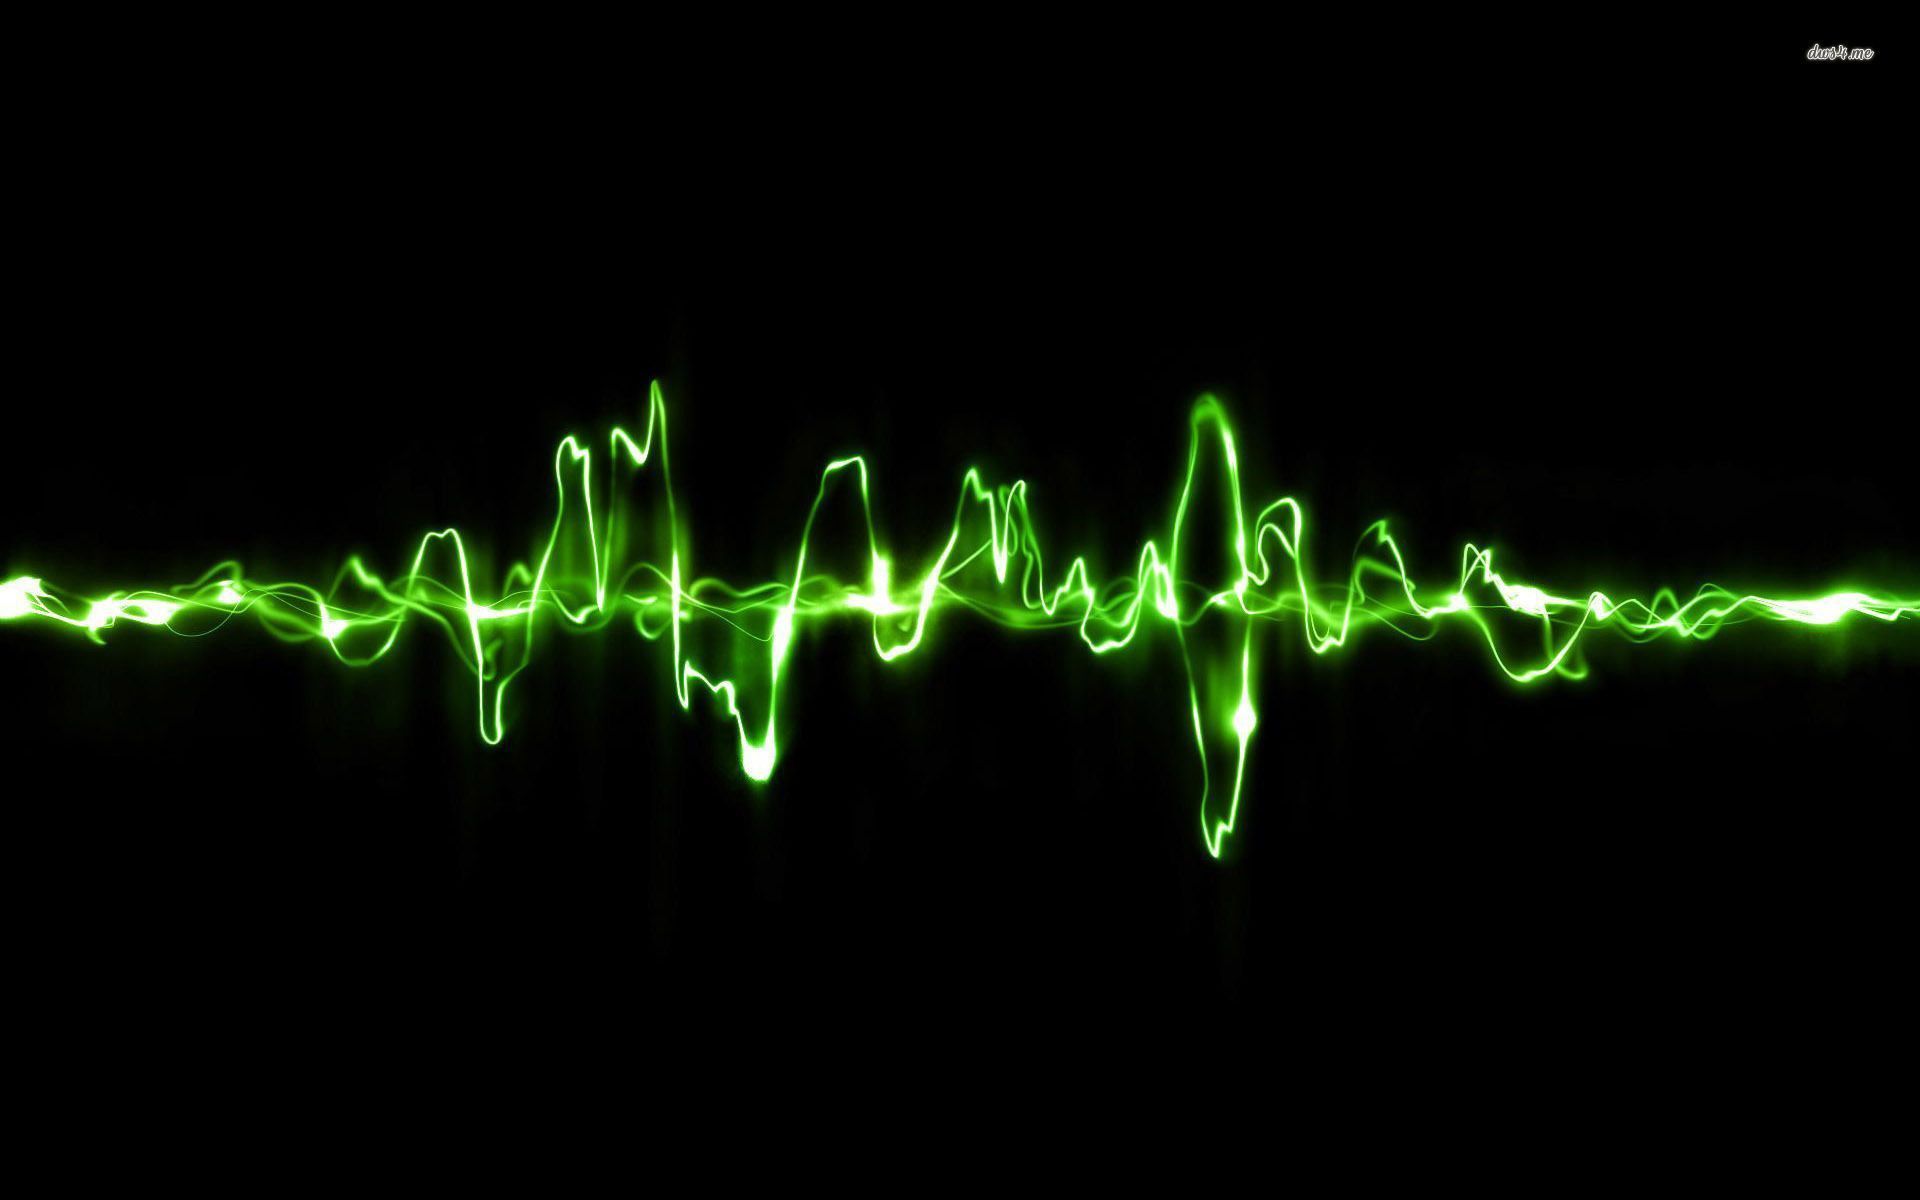 Most Ed Sound Wave Wallpaper Full HD Search